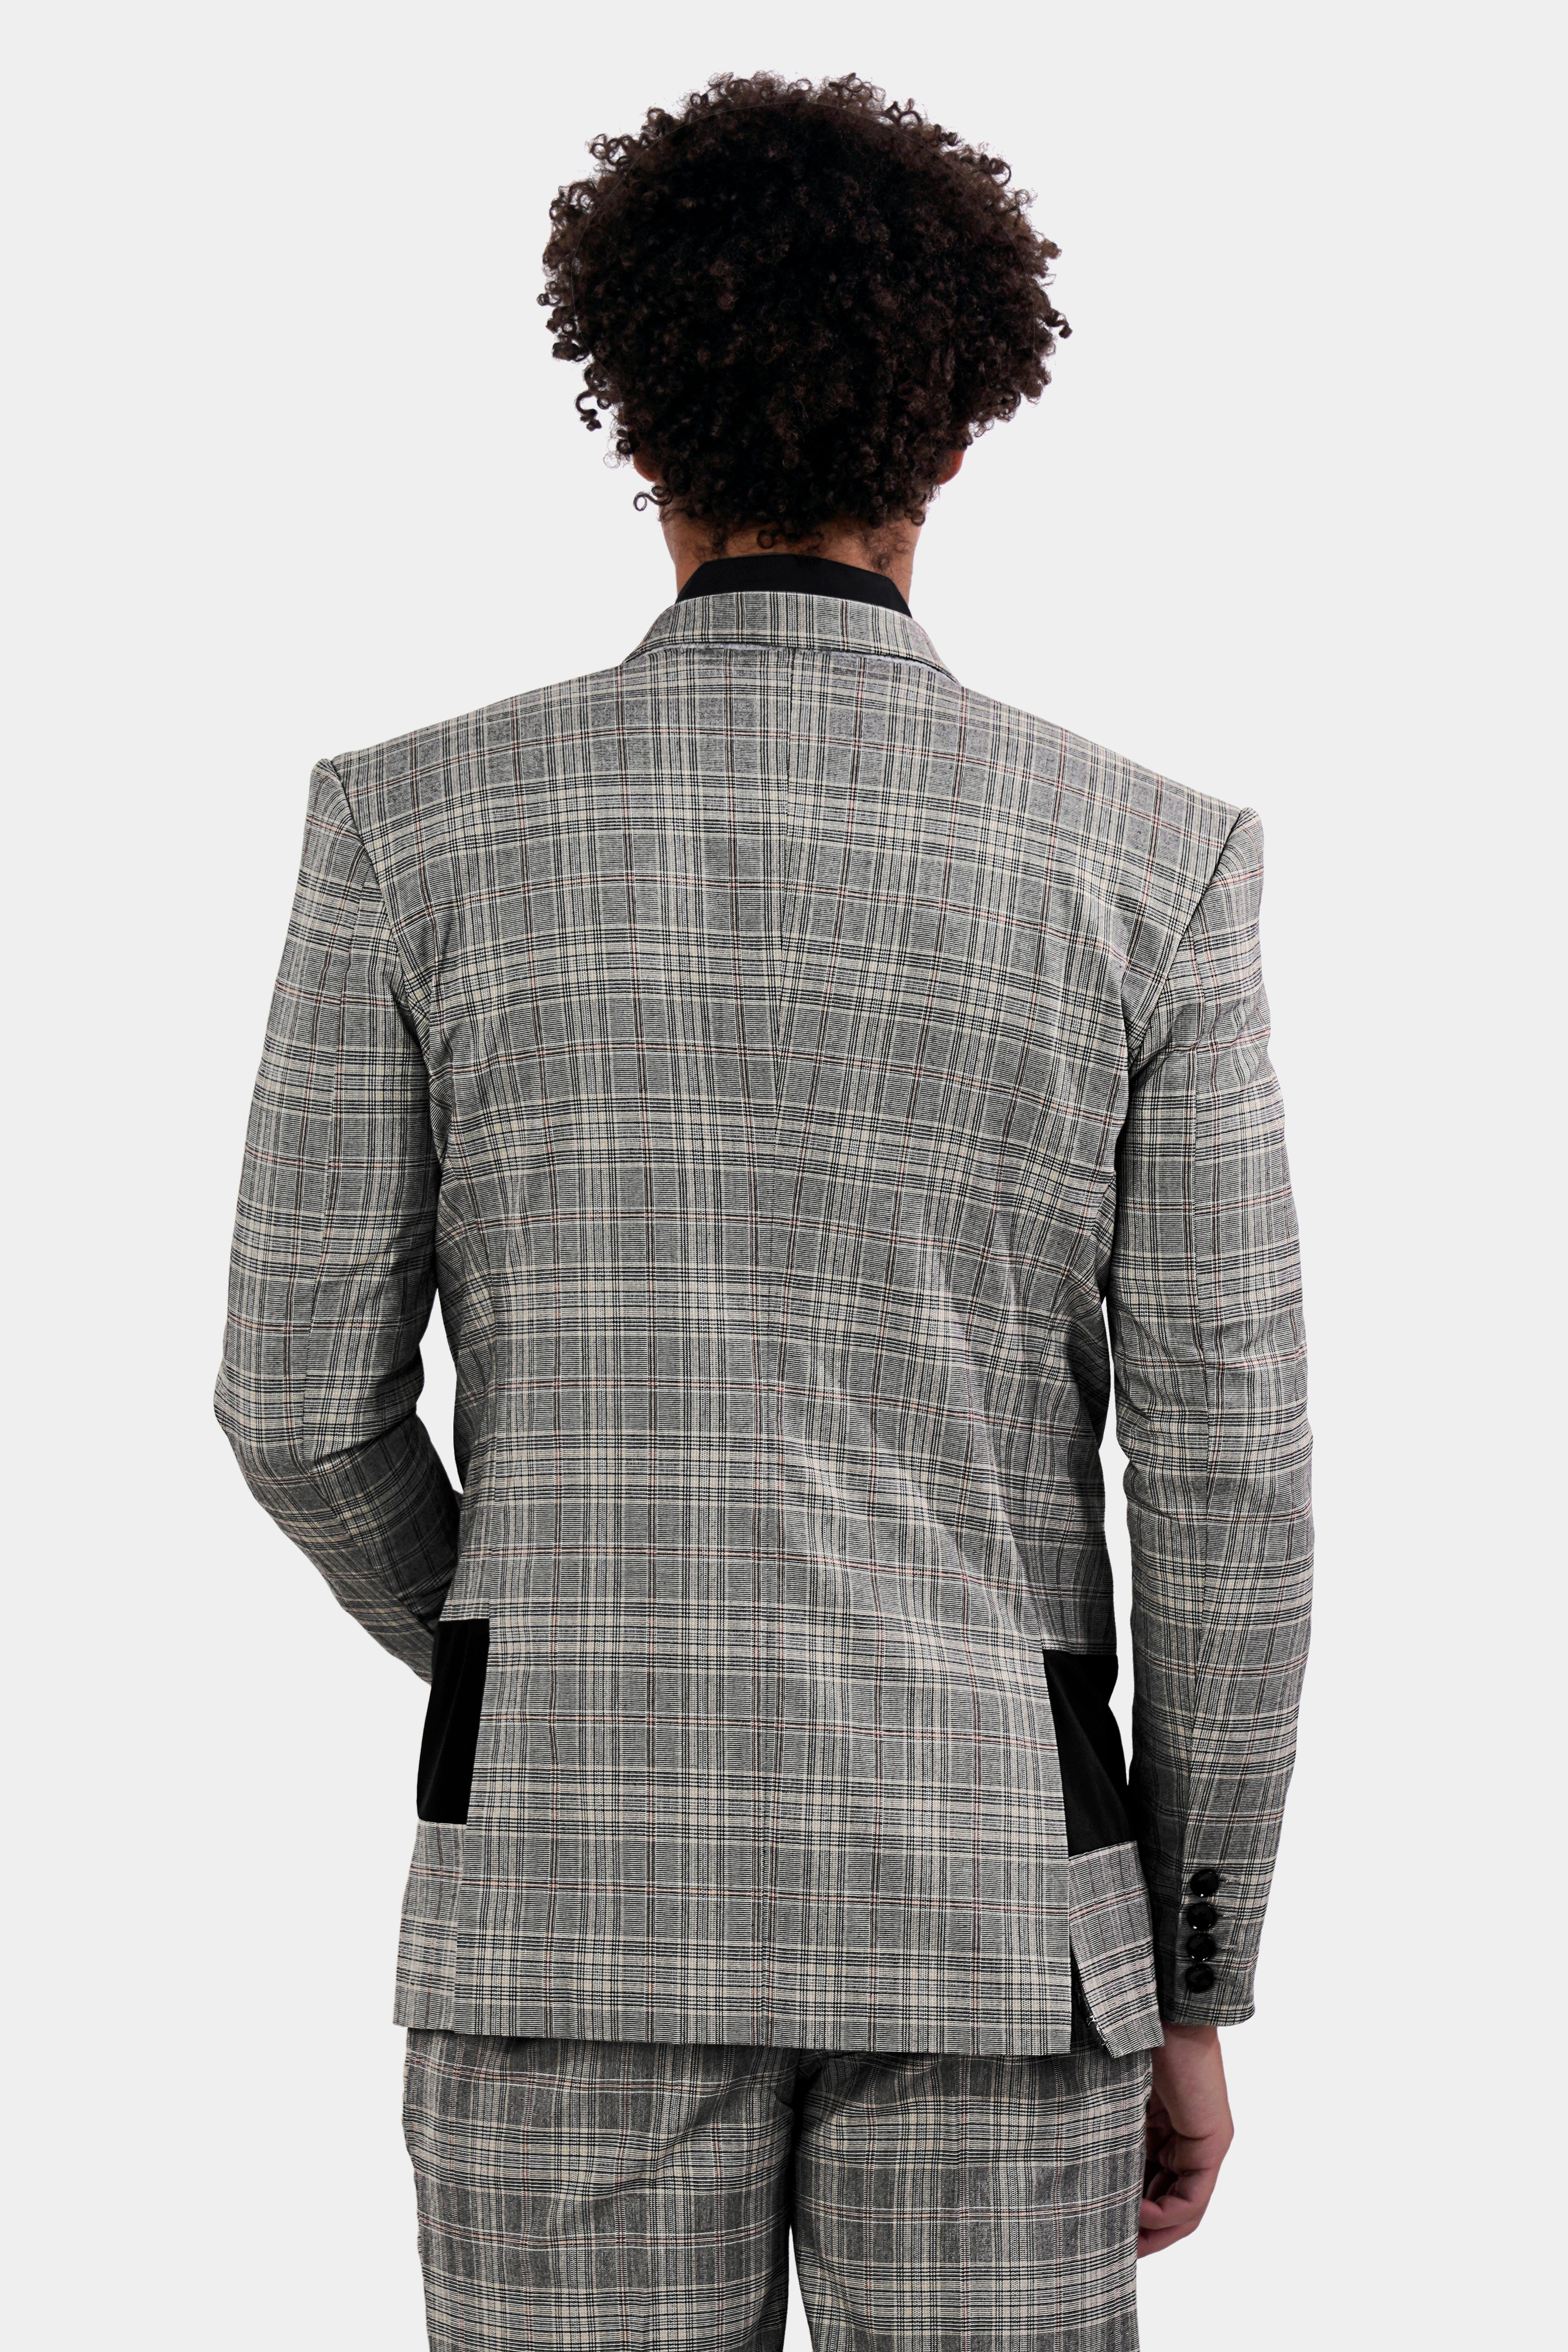 Chalice Gray Plaid and Black Wool Rich Designer Blazer BL2928-SBP-D73-36, BL2928-SBP-D73-38, BL2928-SBP-D73-40, BL2928-SBP-D73-42, BL2928-SBP-D73-44, BL2928-SBP-D73-46, BL2928-SBP-D73-48, BL2928-SBP-D73-50, BL2928-SBP-D73-52, BL2928-SBP-D73-54, BL2928-SBP-D73-56, BL2928-SBP-D73-58, BL2928-SBP-D73-60